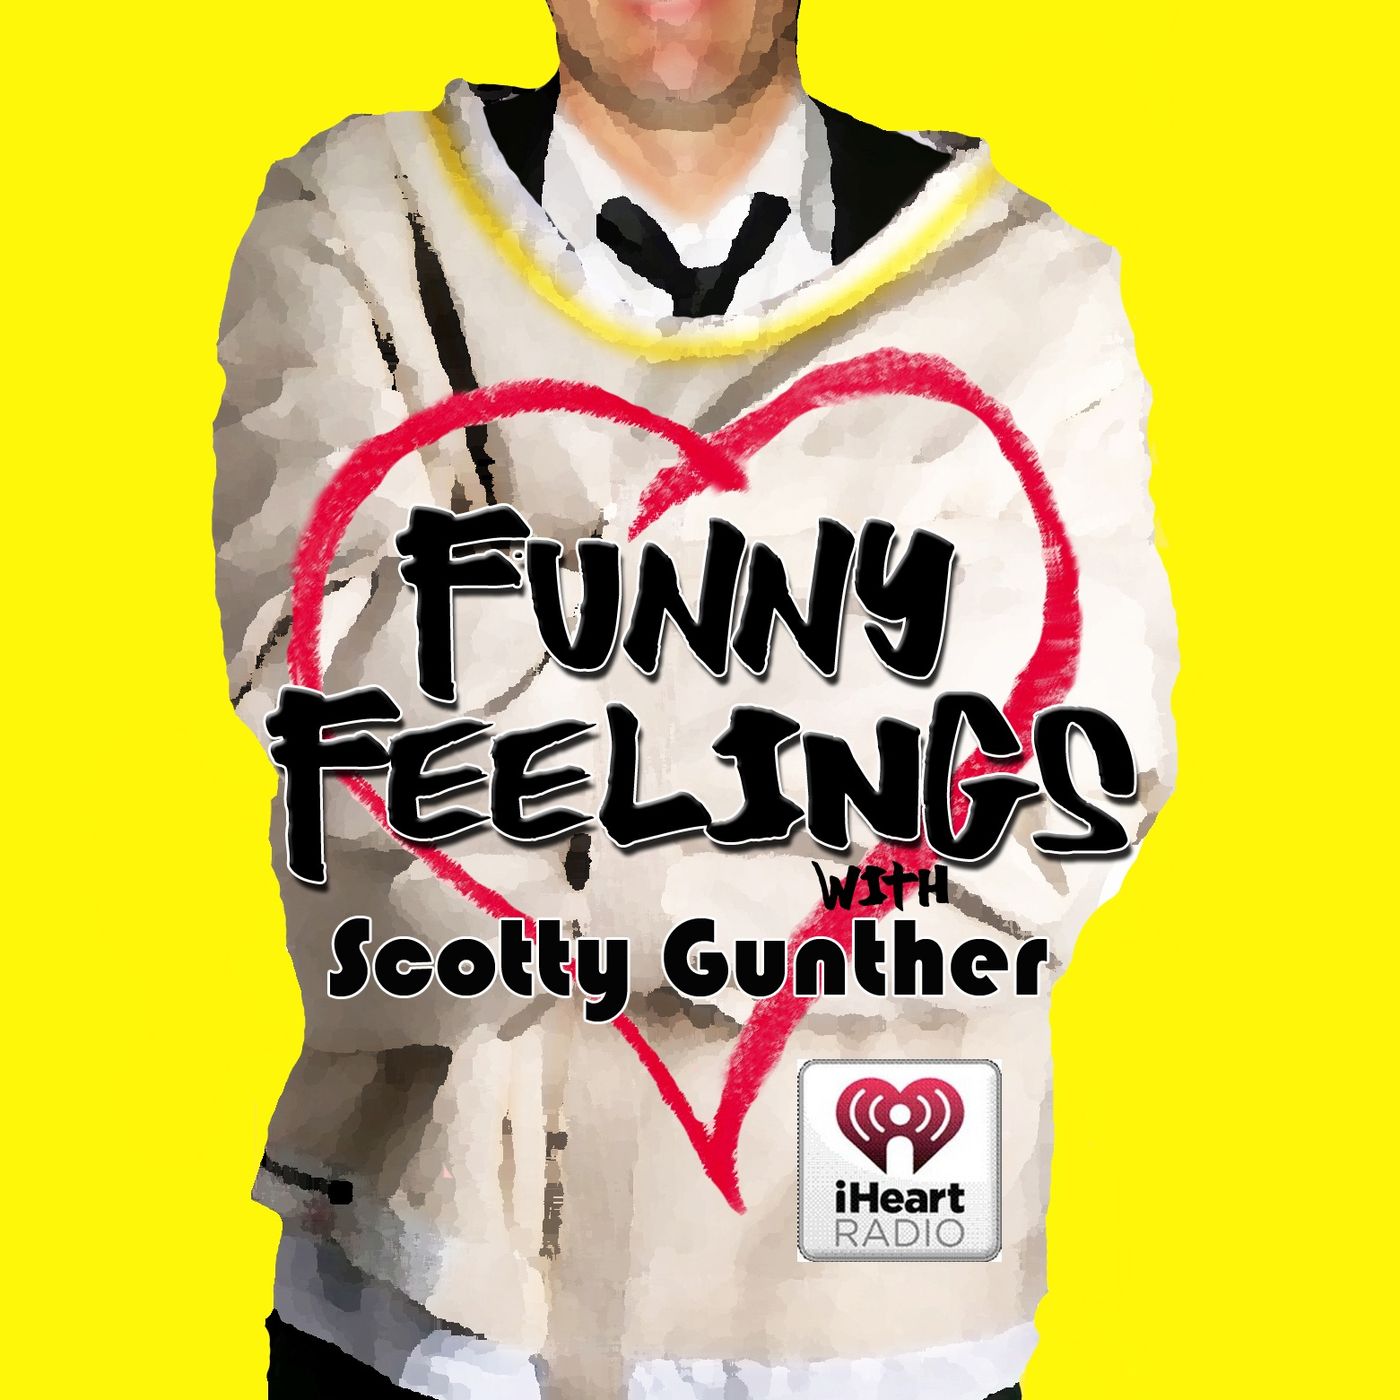 Funny Feelings with Scotty Podcast